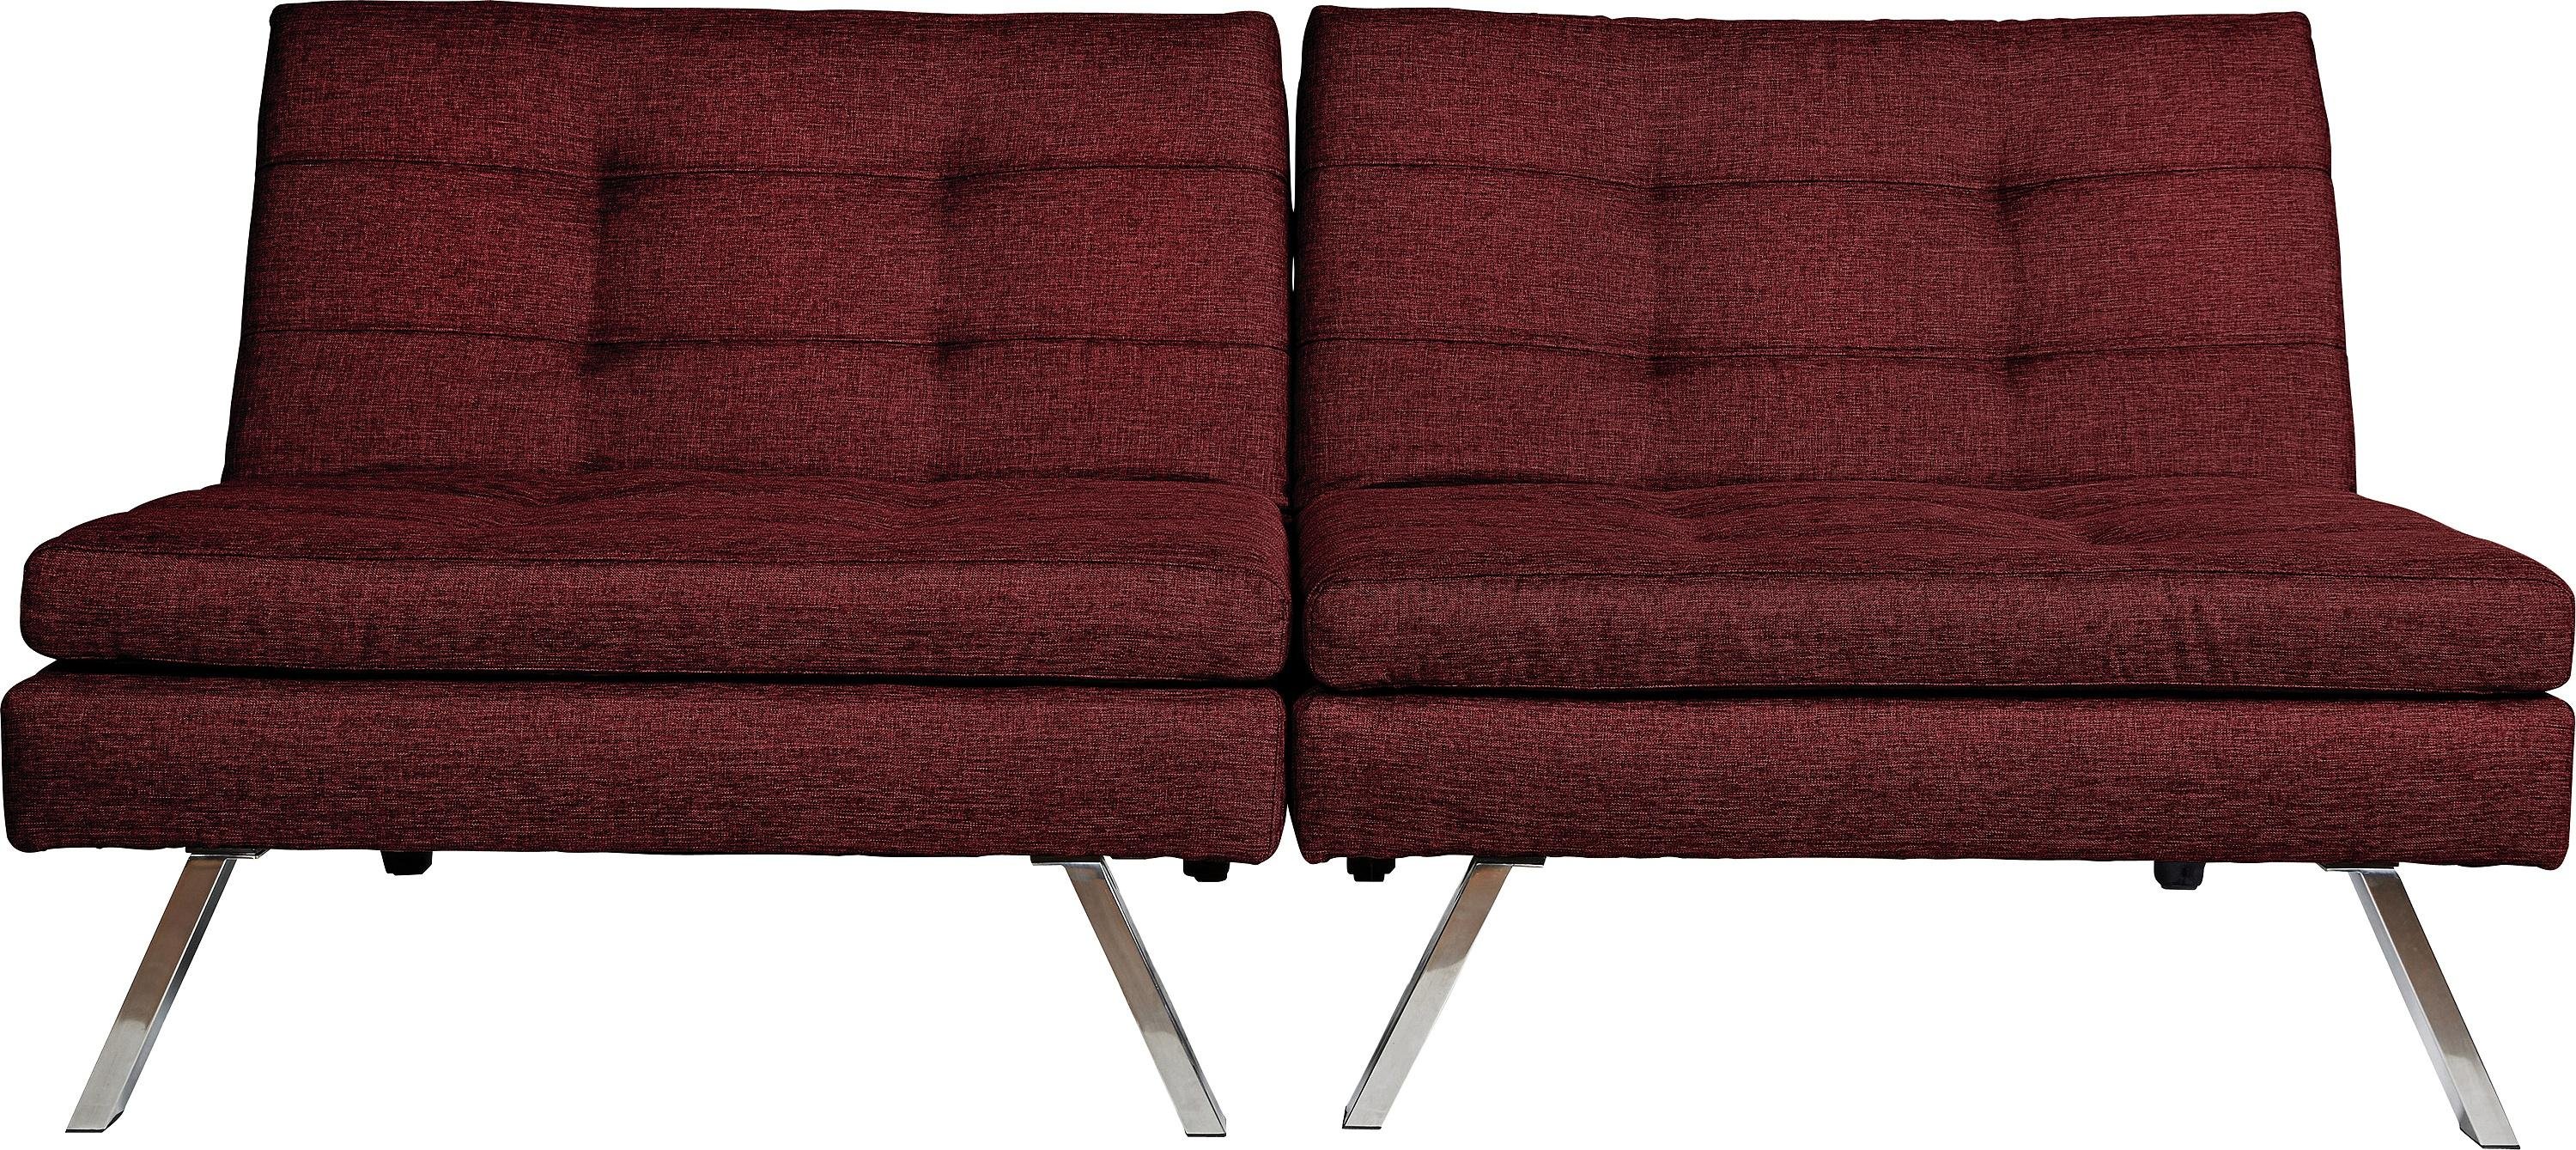 Argos Home Duo 2 Seater Clic Clac Sofa Bed - Red